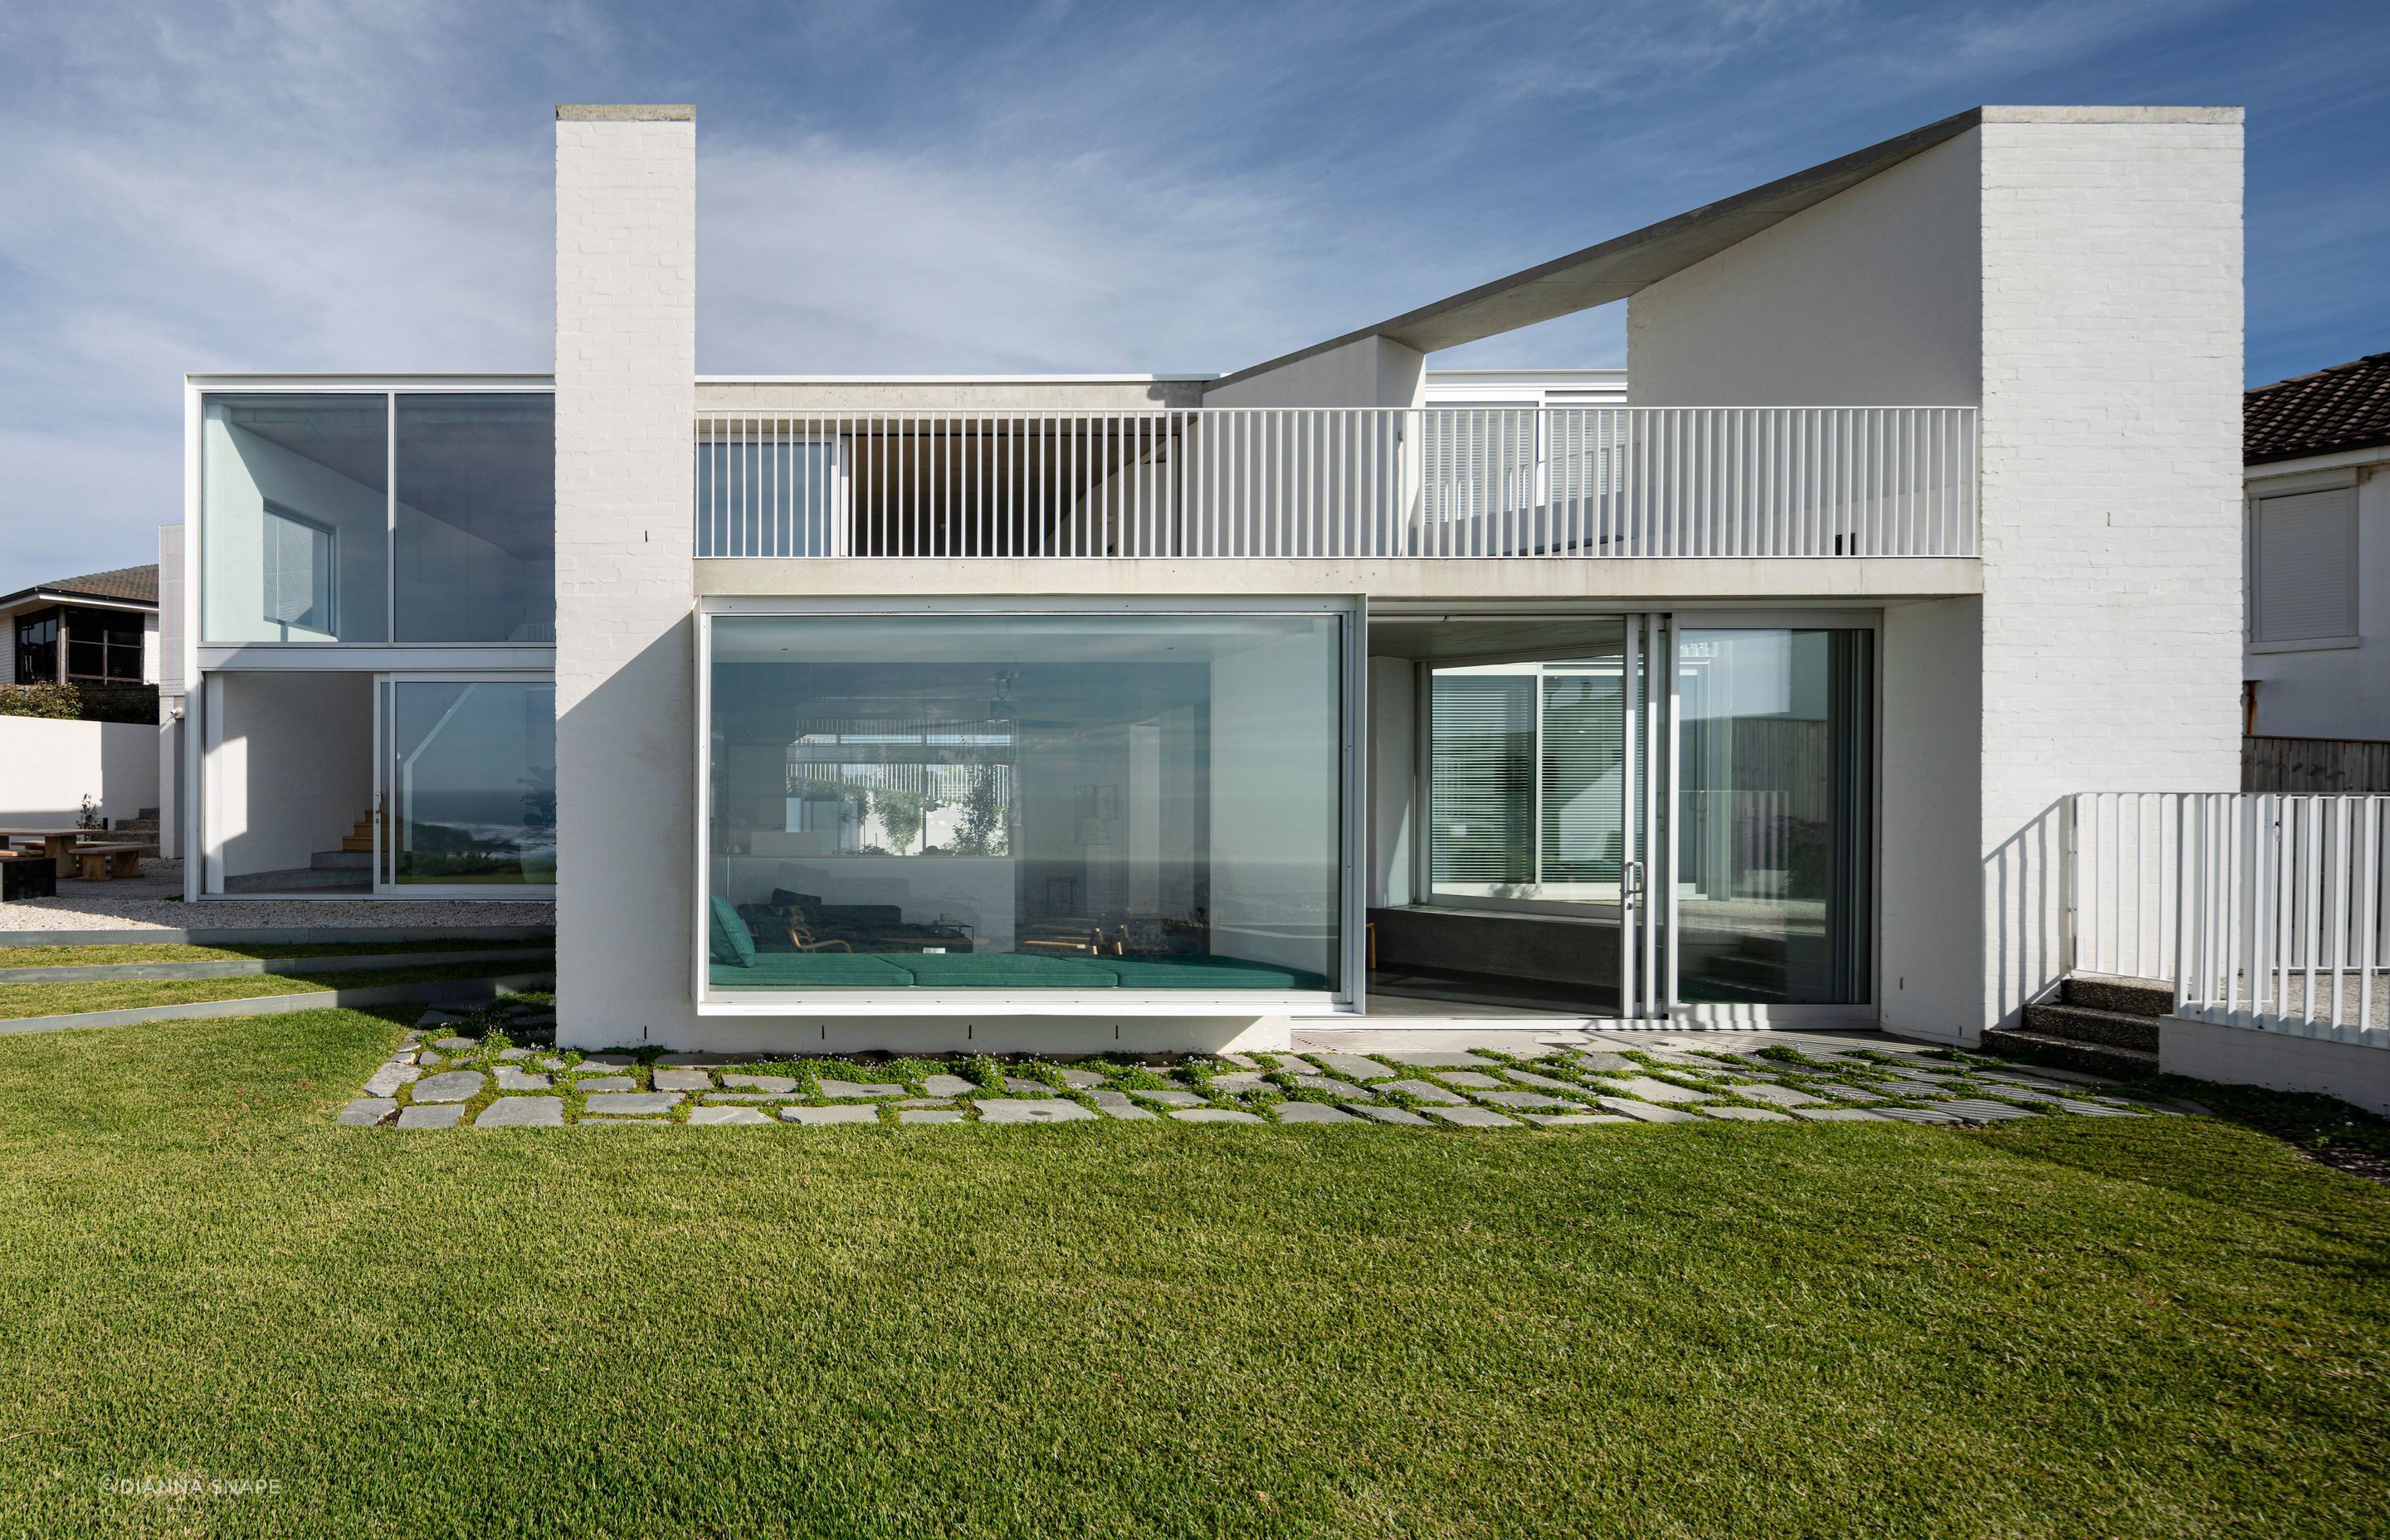 The form of the home follows the line of the section, which is narrower at the driveway end and widens towards the sea views.